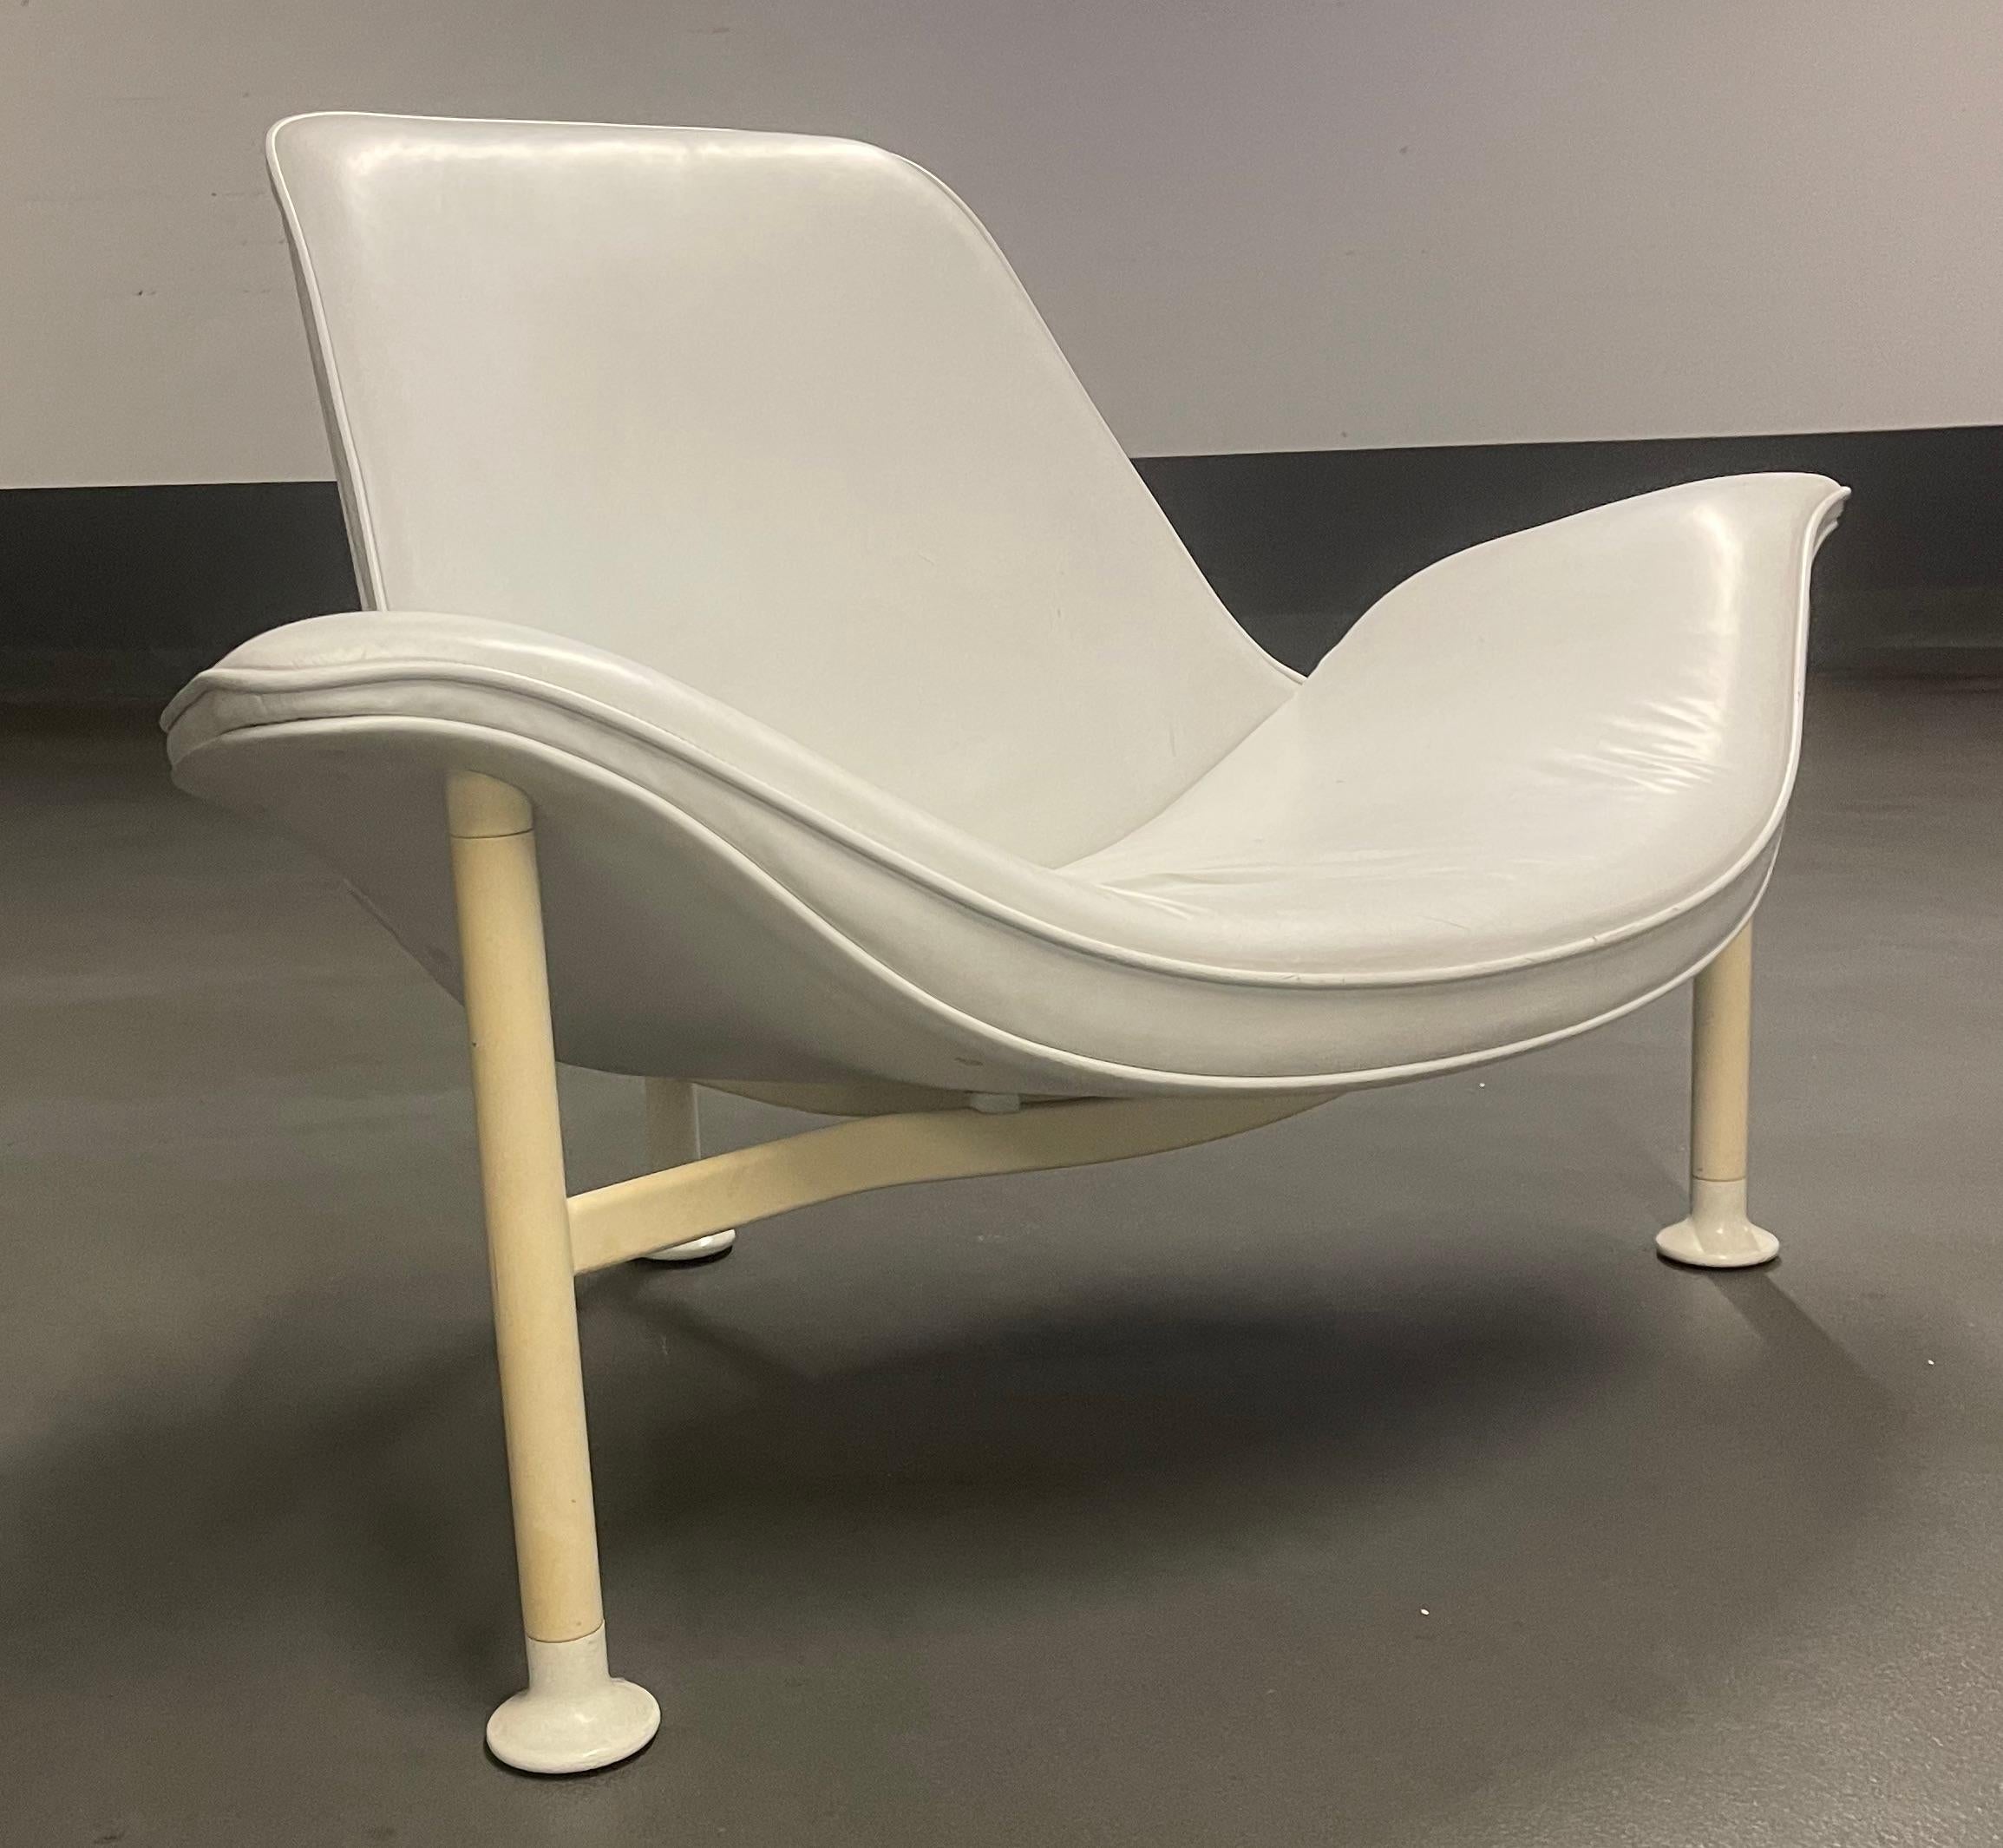 We are very proud to offer this outstanding rare lounge chair by jørgen kastholm. In more than 20 years of searching, dealing and collecting we only saw 2 of these big chairs. A white one with white base and a brown one with chromed base. According